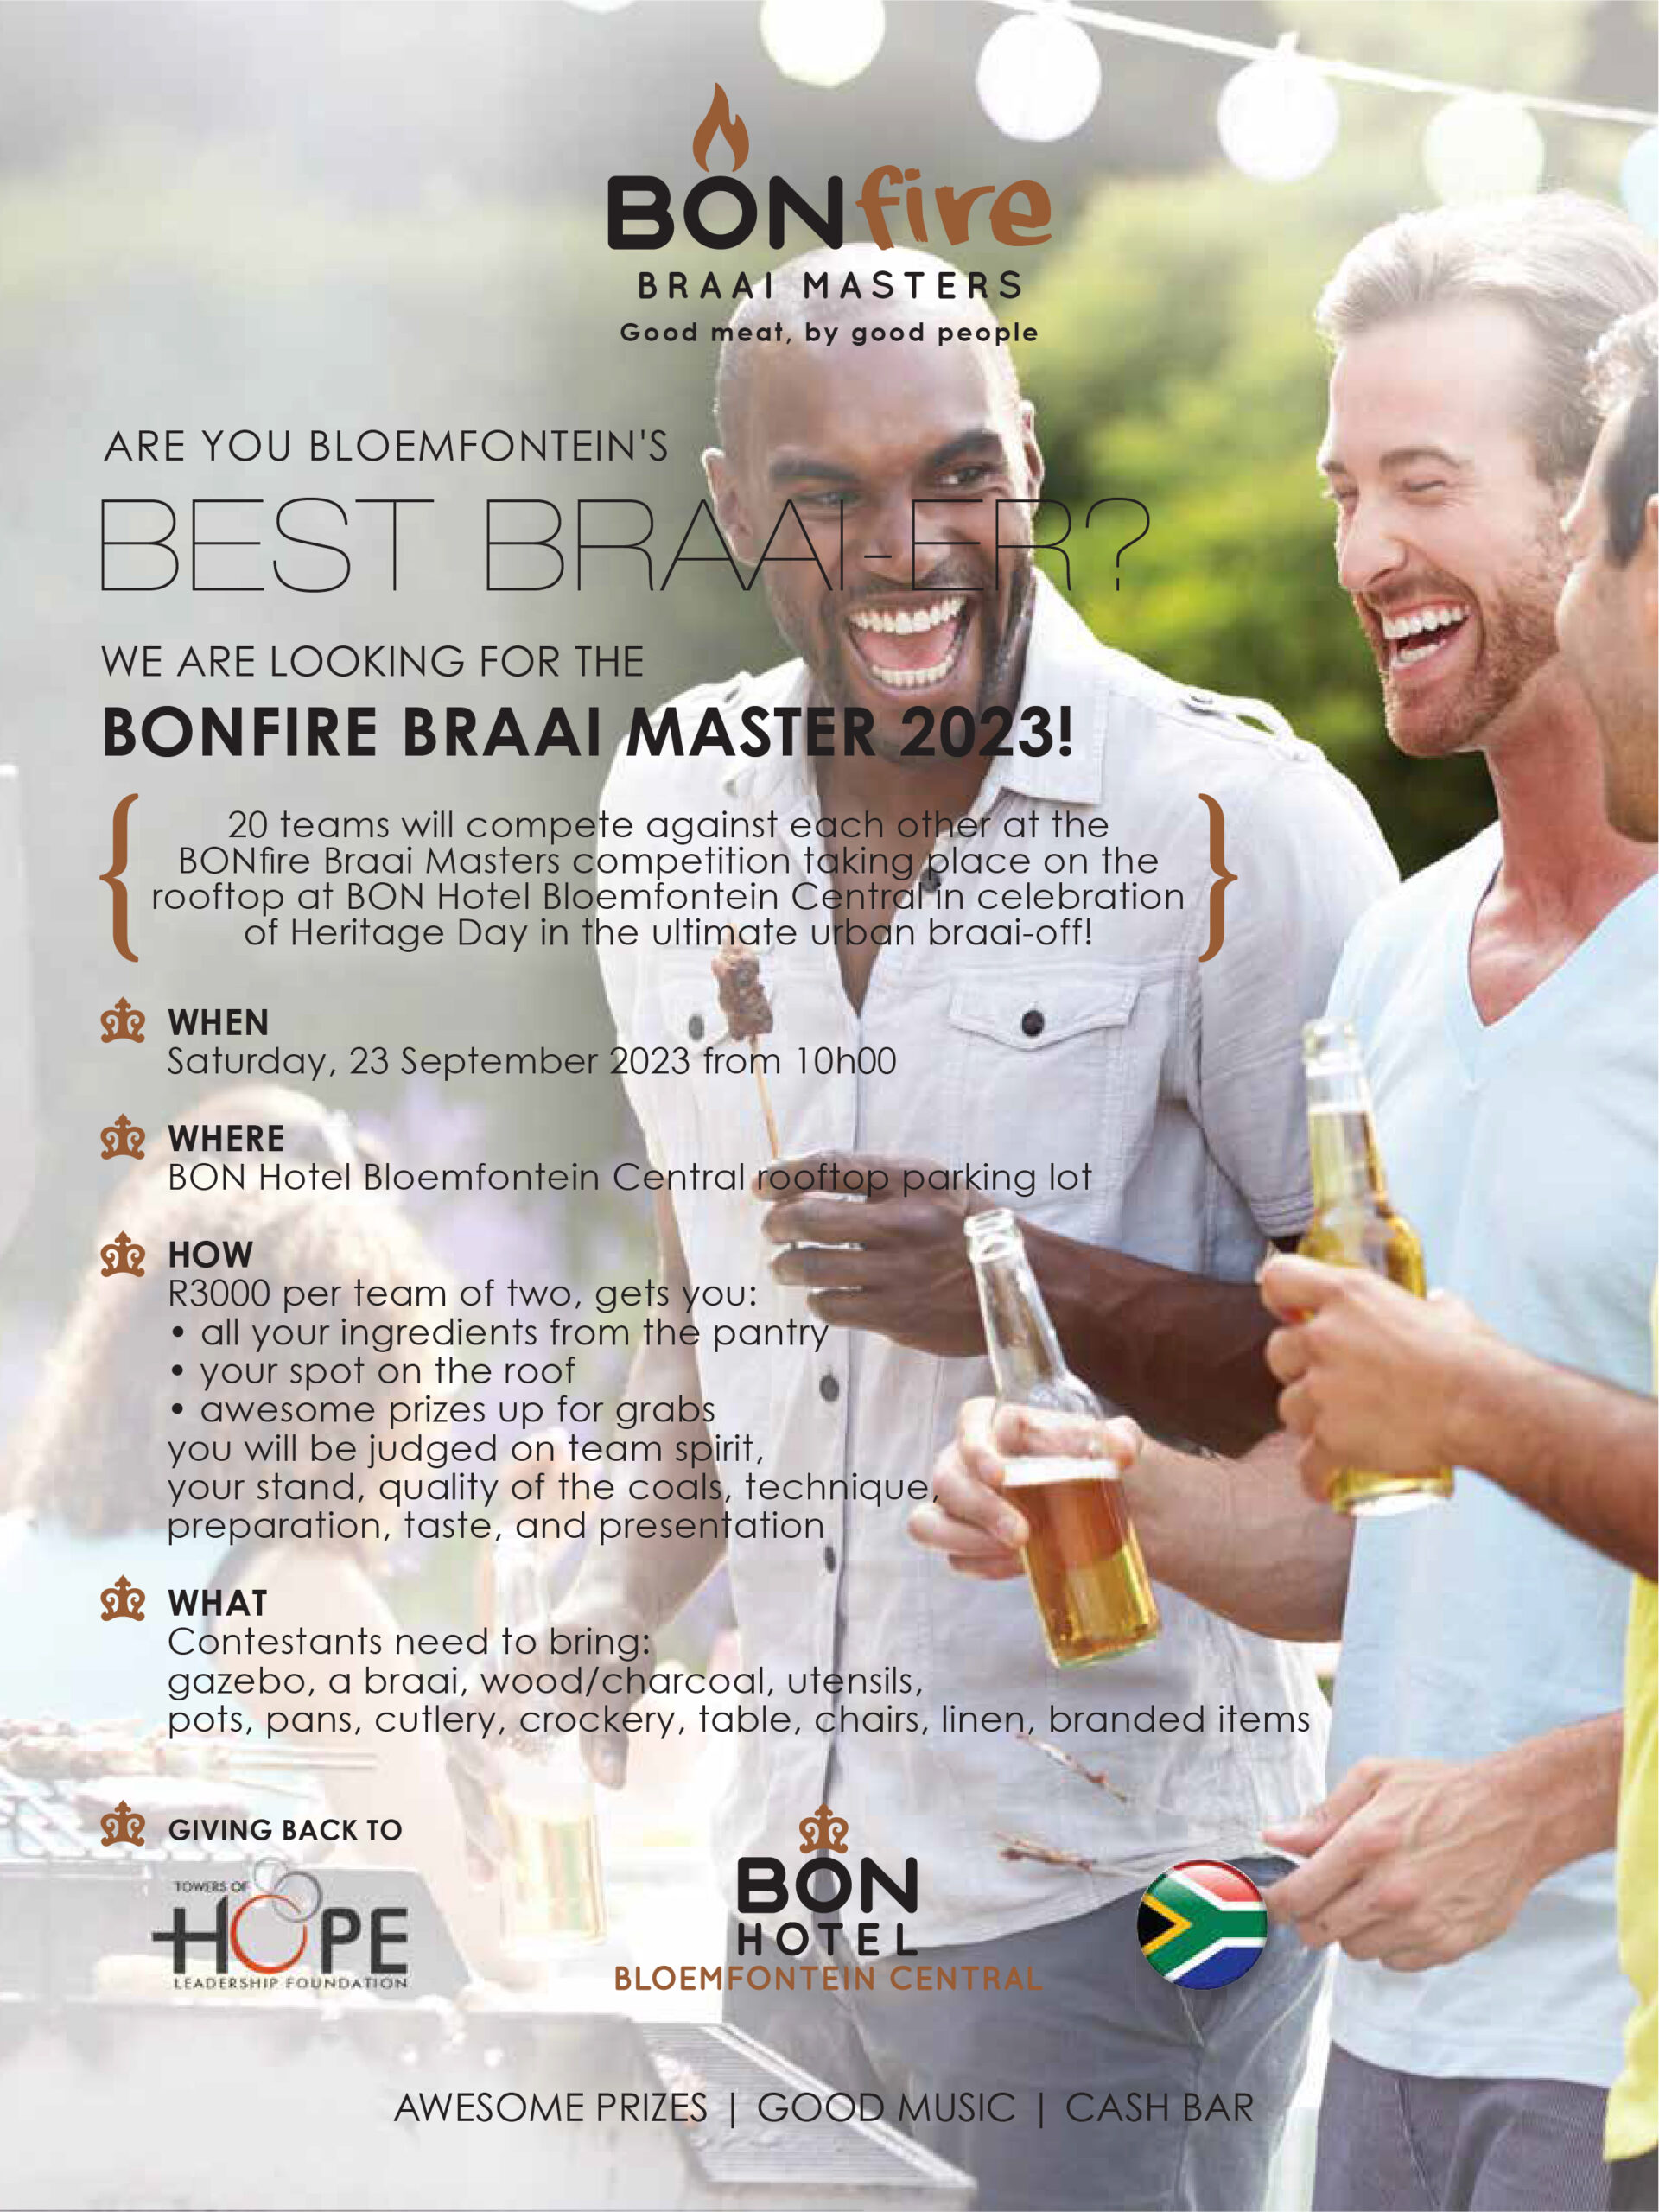 BON Appetits | BON Hotel Bloemfontein Central is looking for the ultimate BONfire braai master | 23 September 2023 gather your team, and prepare for the ultimate showdown!